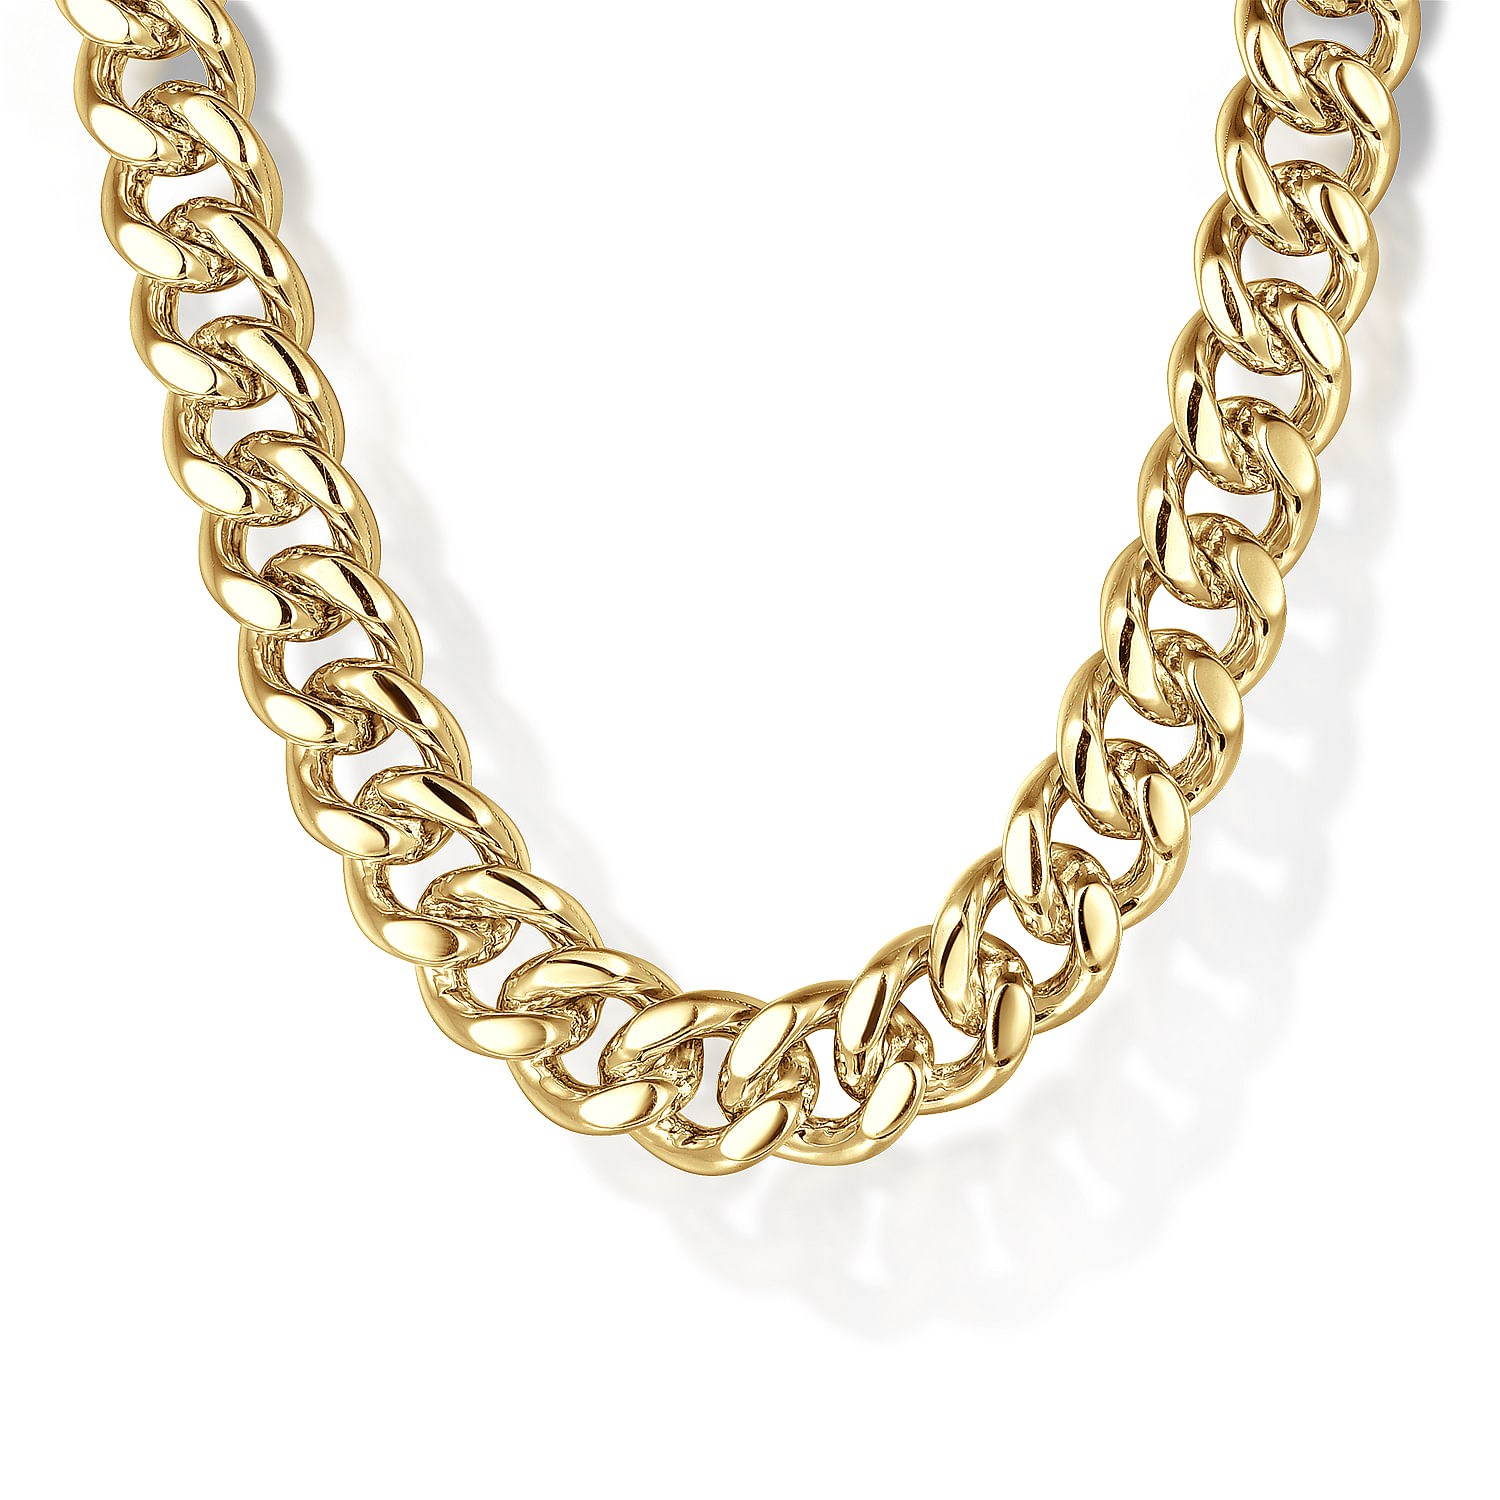 24 Inch 7mm 14K Yellow Gold Solid Men's Diamond Cut Chain Necklace